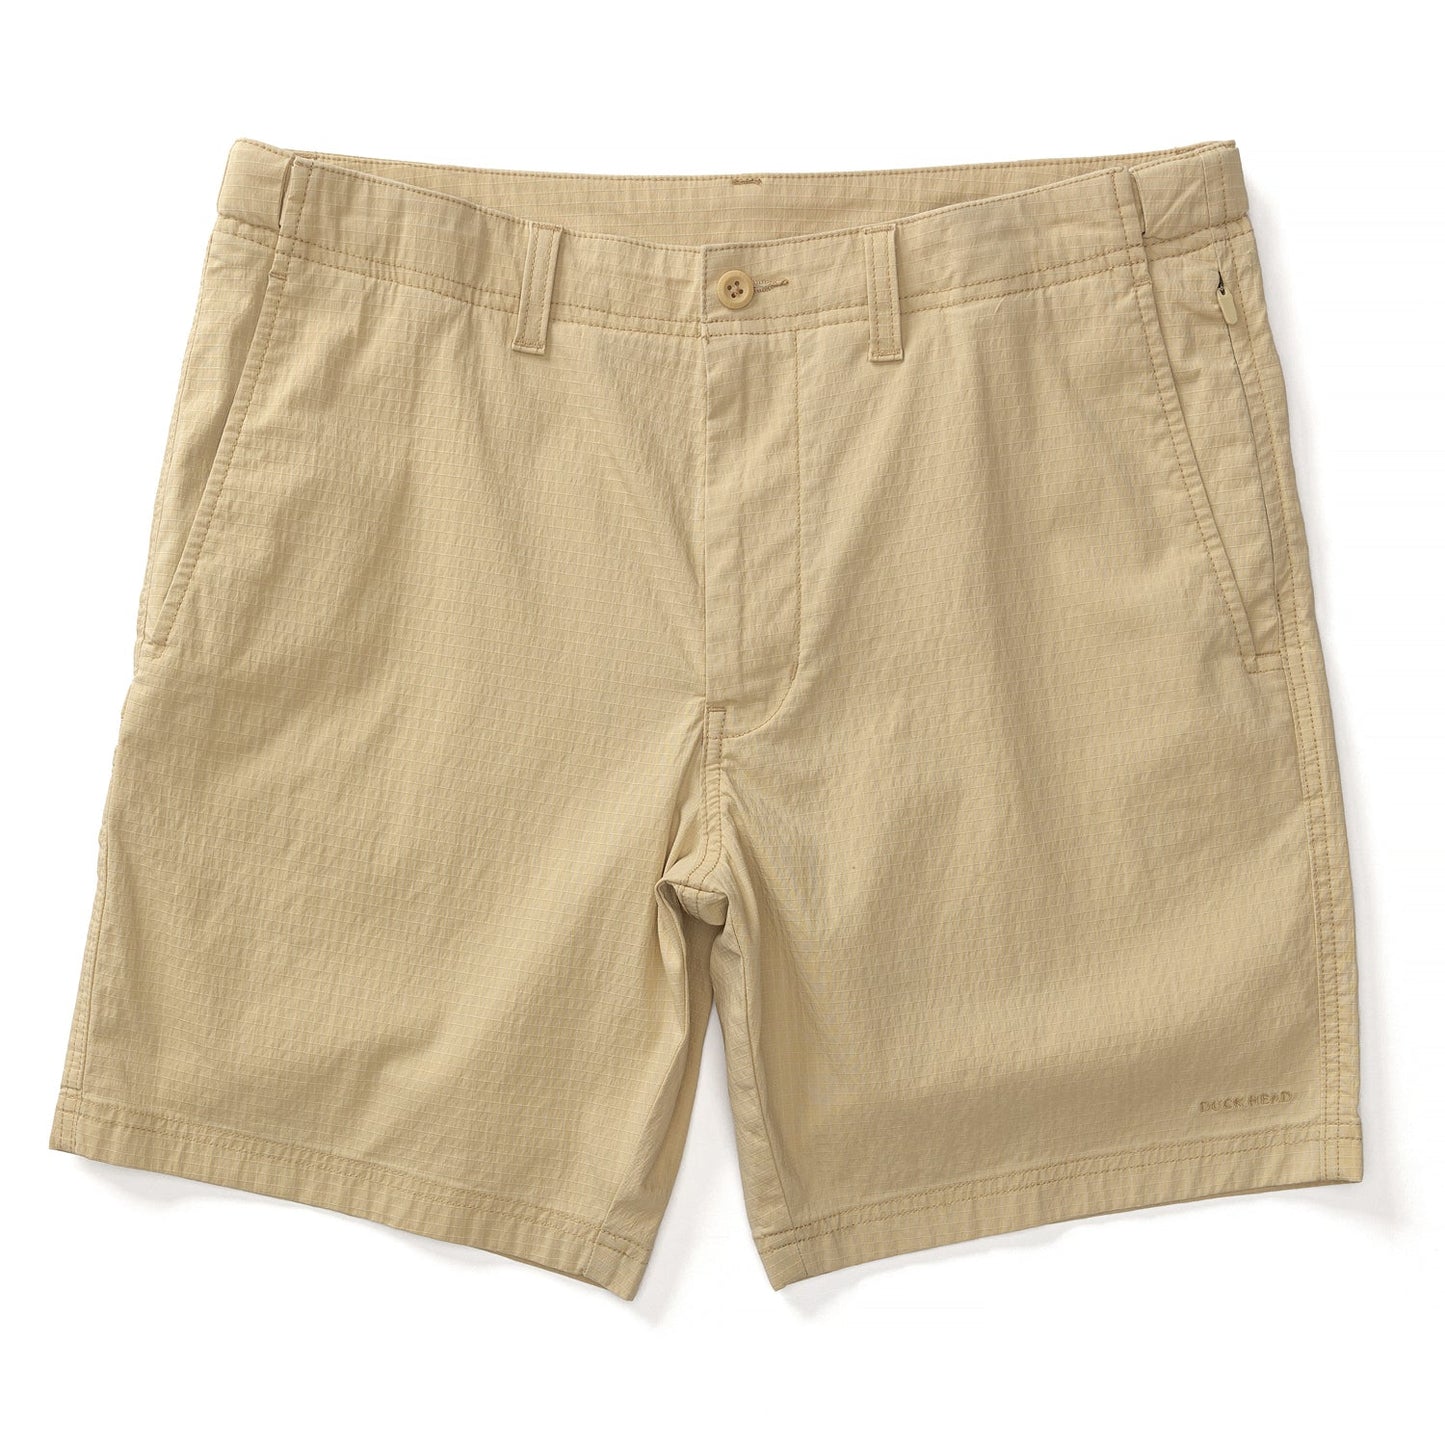 Duck Head 8" On The Fly Performance Short